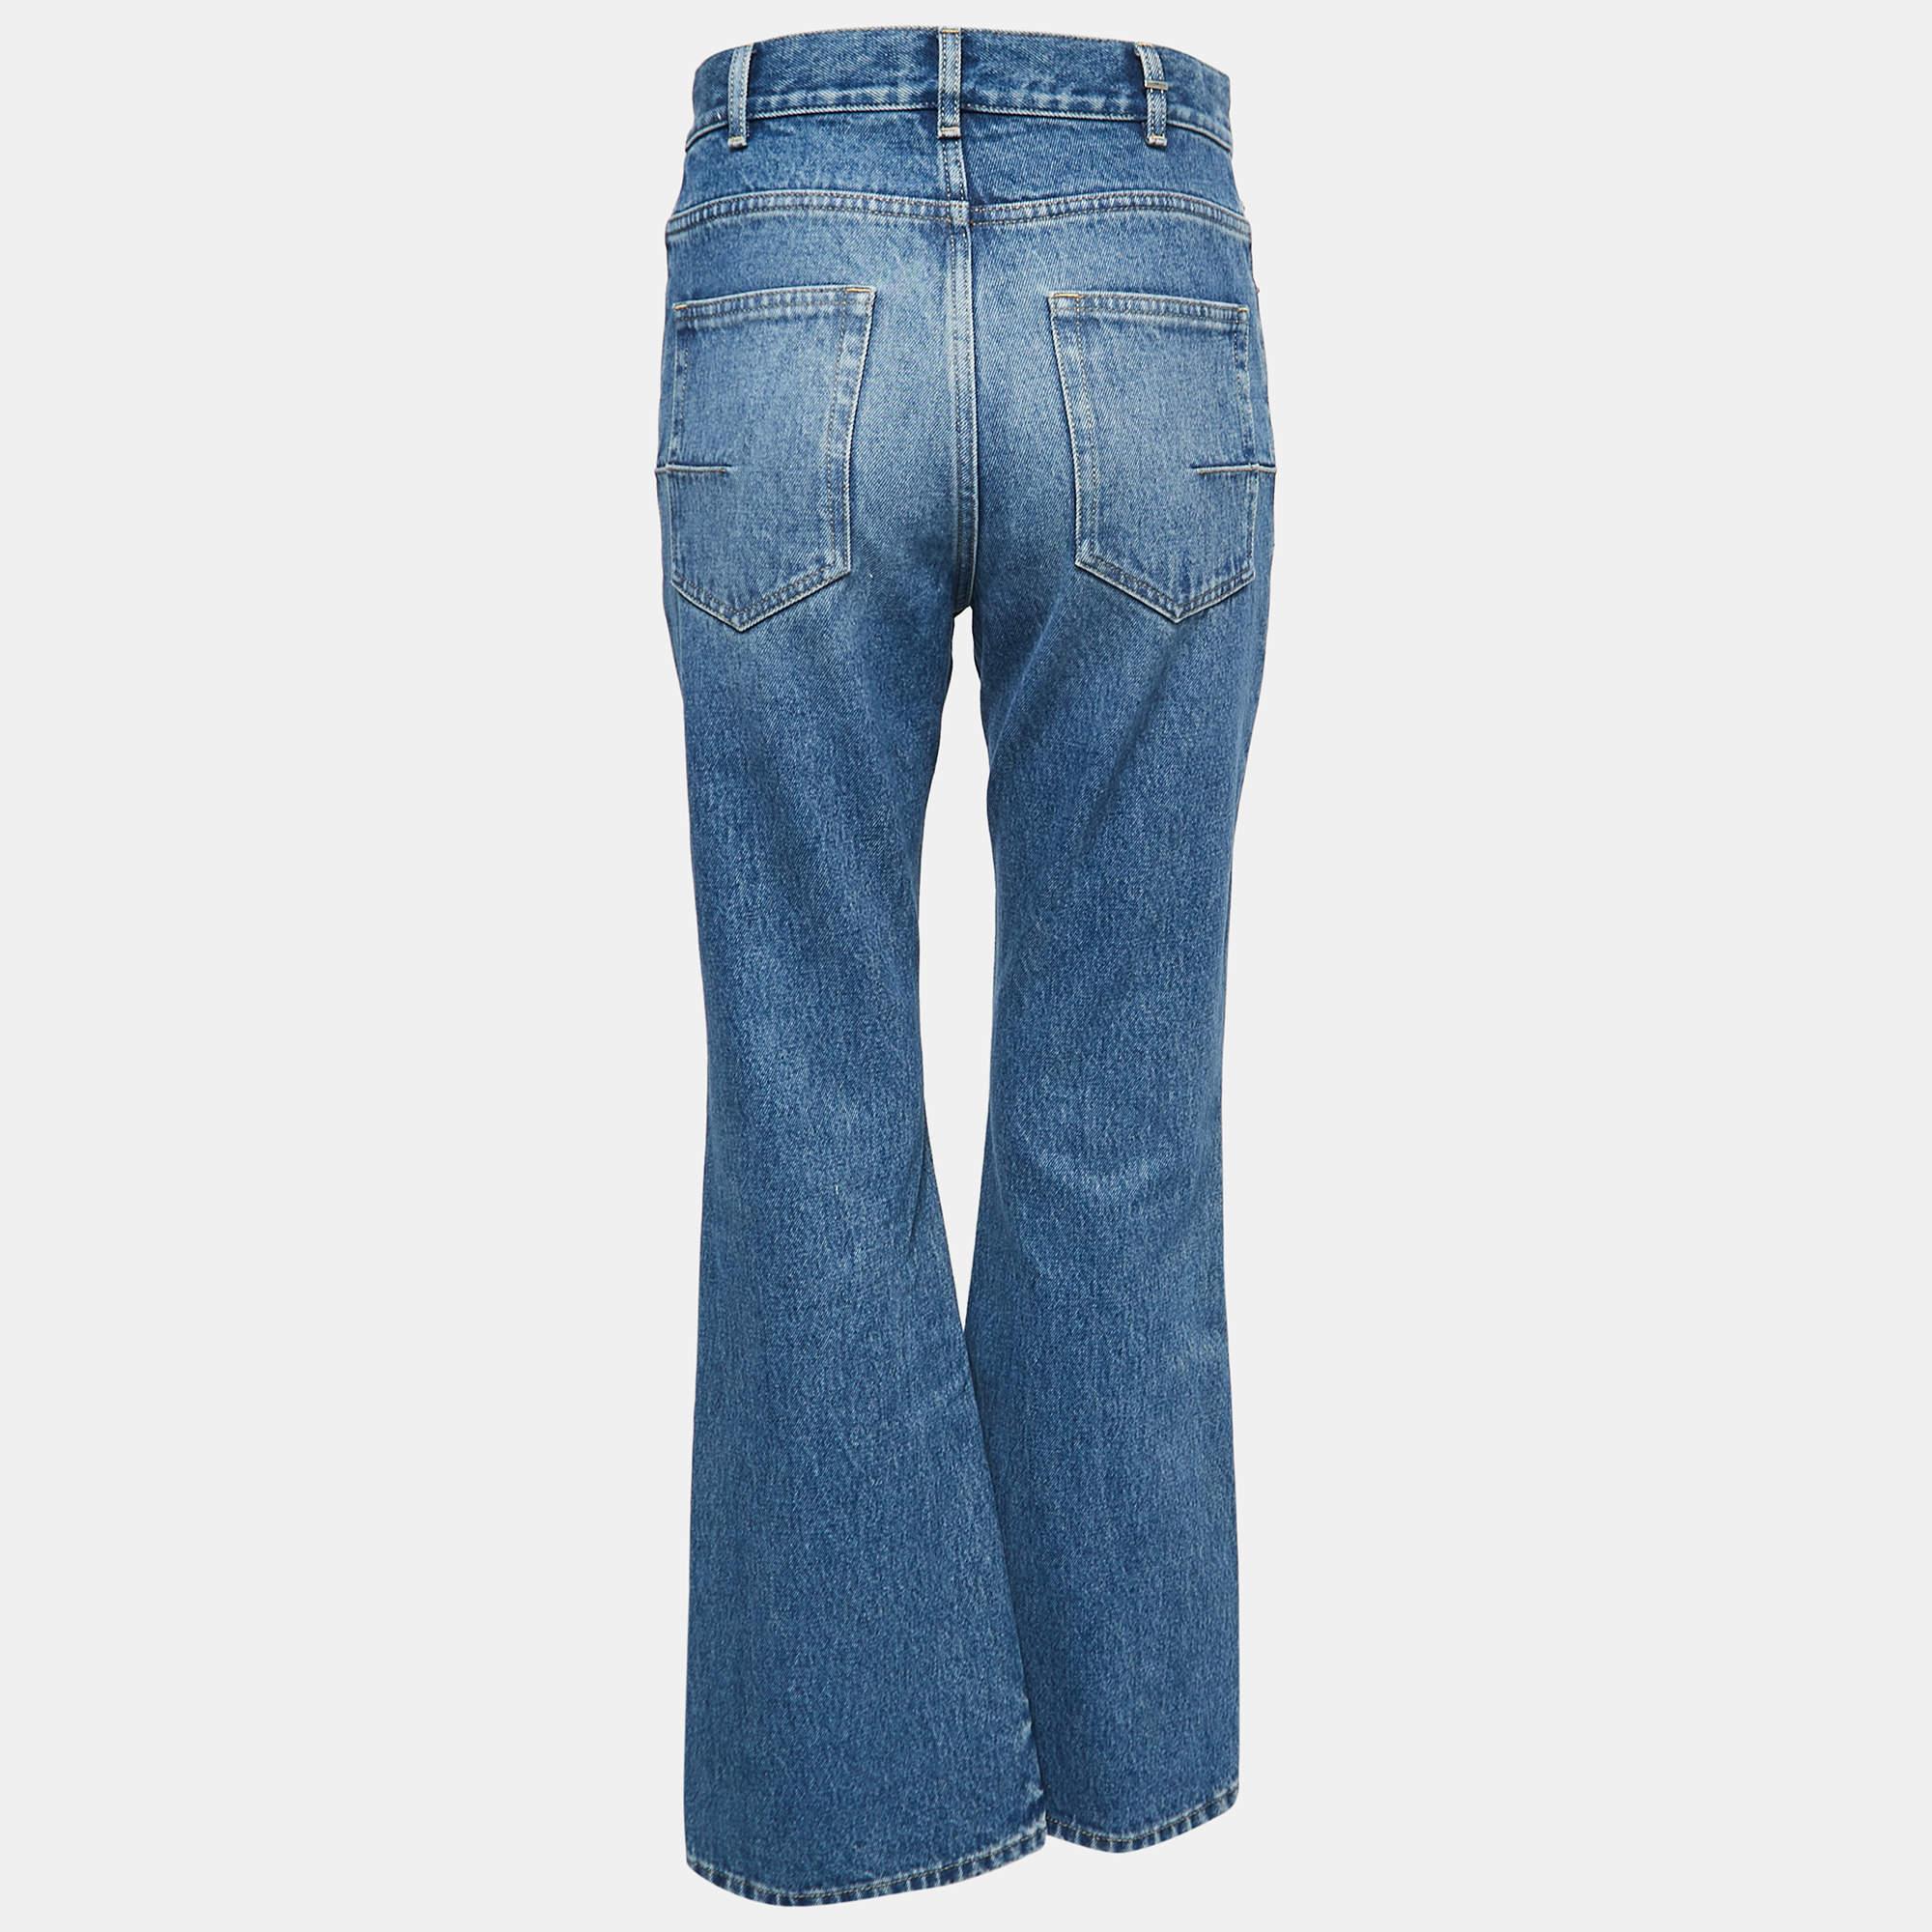 Pick these jeans from Christian Dior and feel absolutely stylish. They have been skillfully stitched using high-quality fabric and flaunt a superb fit. Pair these jeans with your favorite sneakers as you head out for the day.

